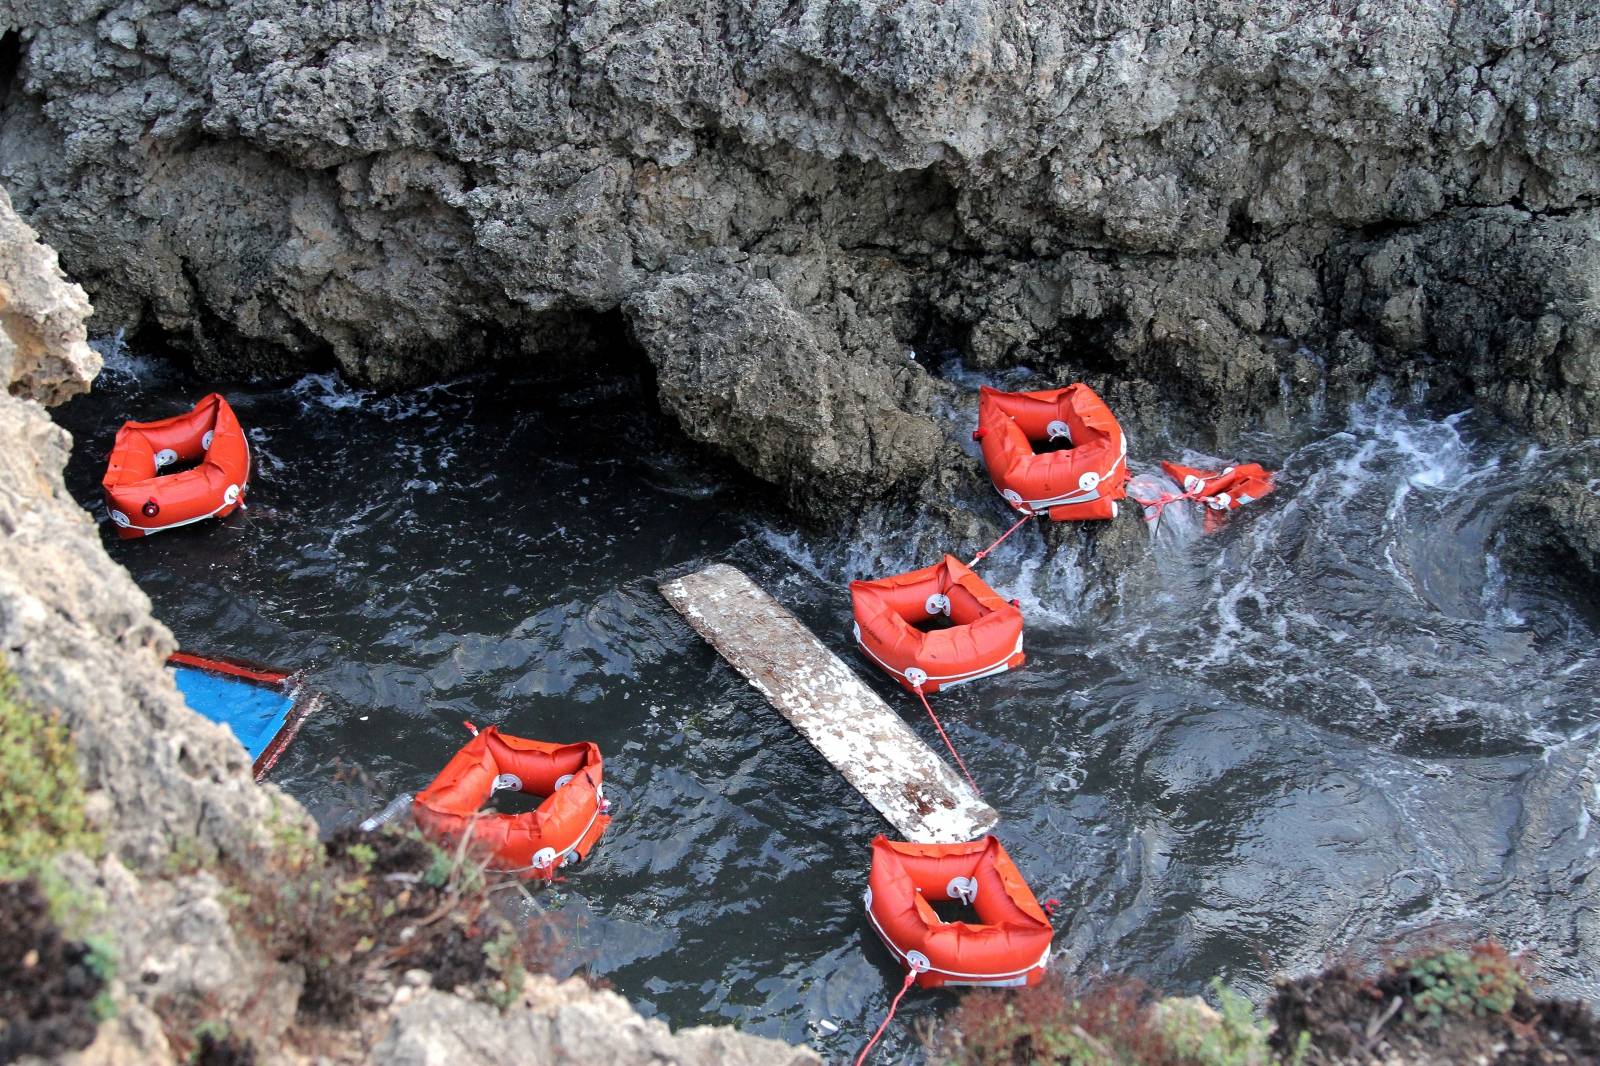 Flotation devices are seen in the area where a migrant boat capsized off the Italian coast, on the island of Lampedusa